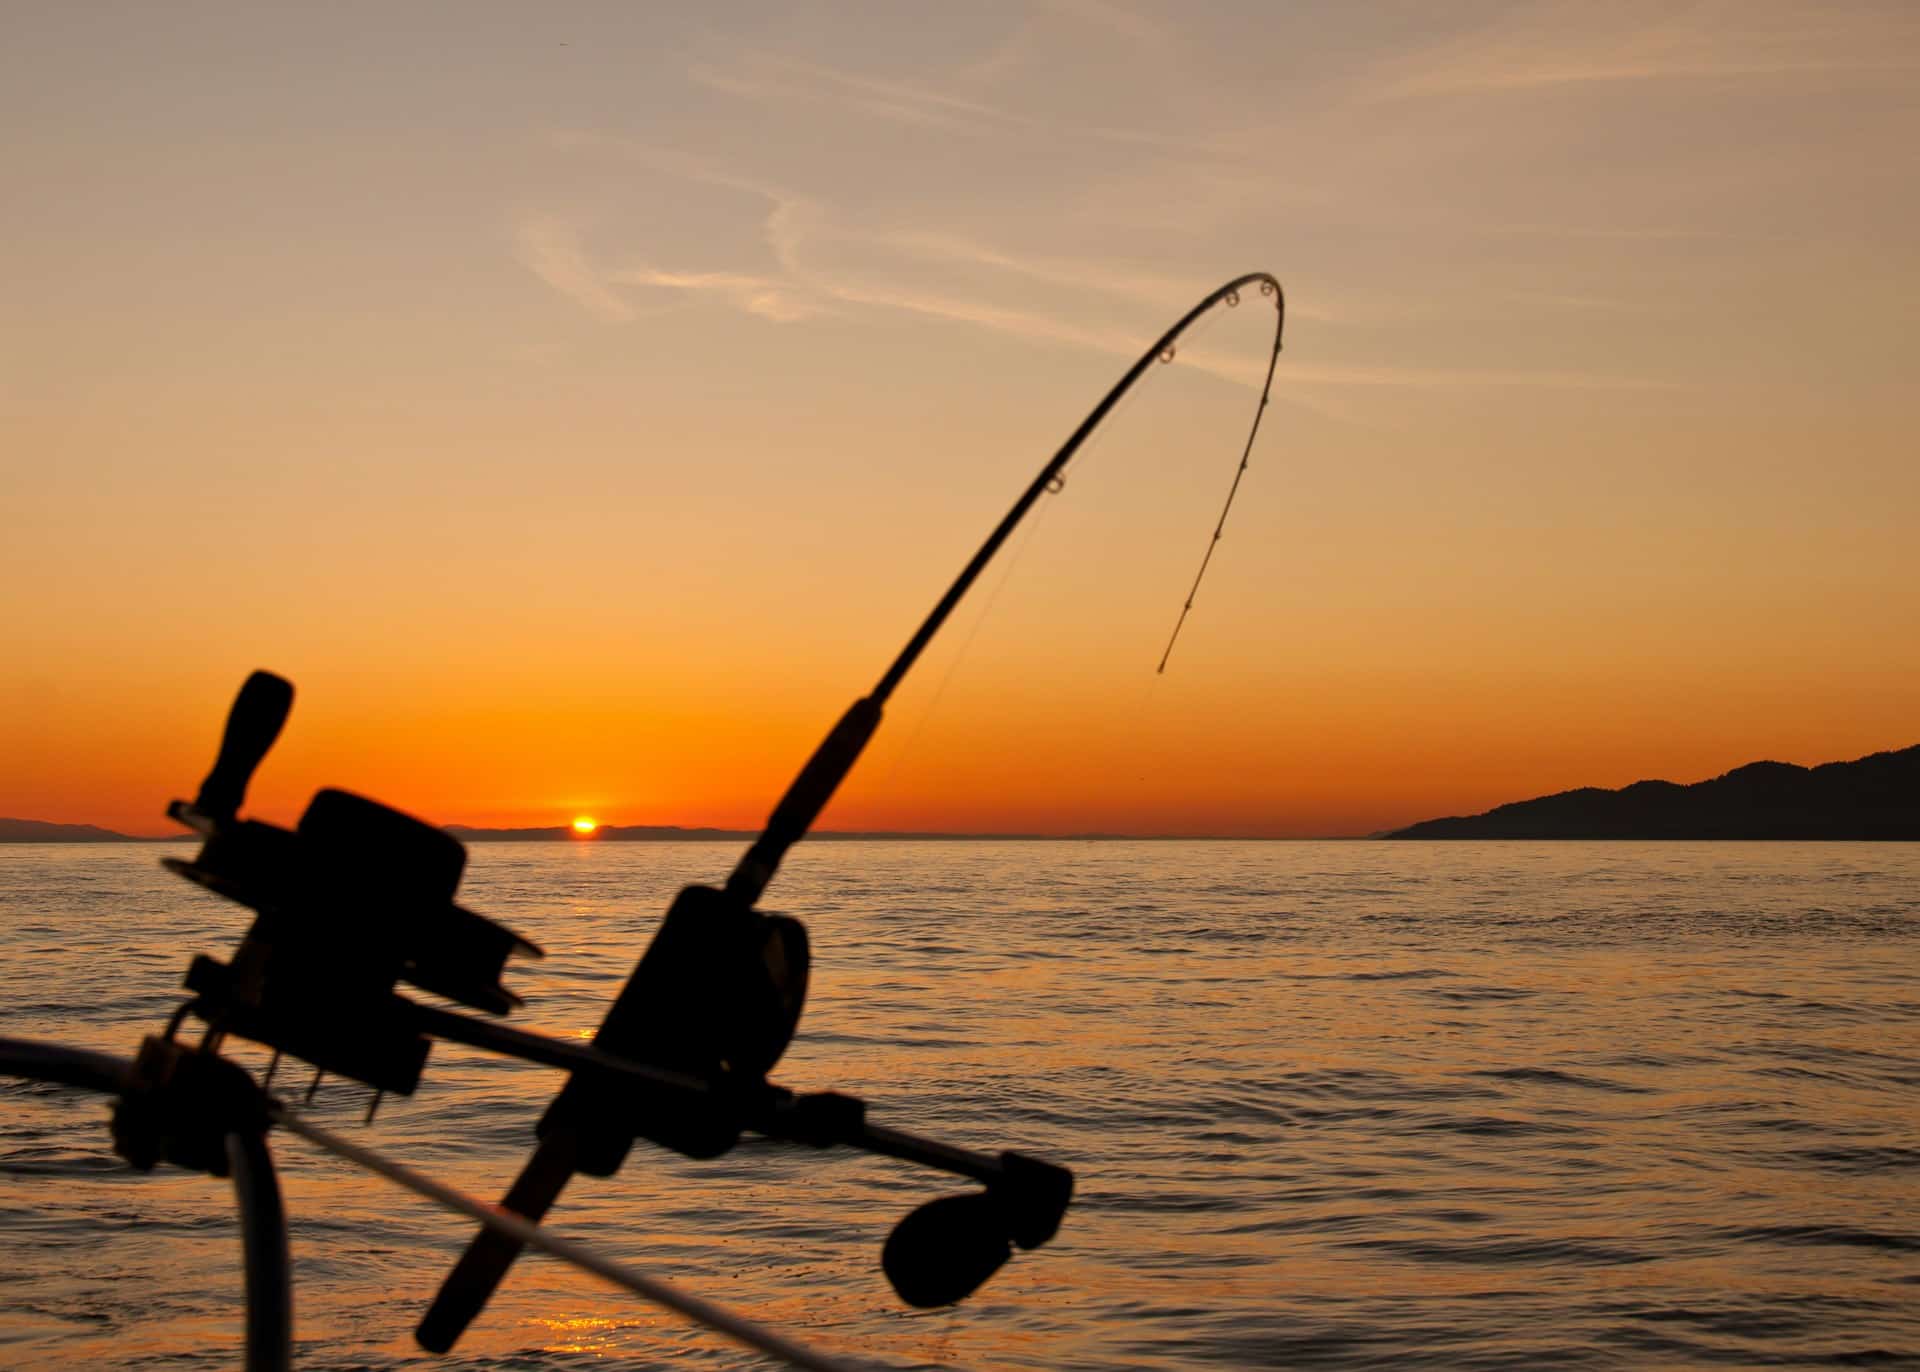 Silhouette of fishing rod with sunset and sea in background